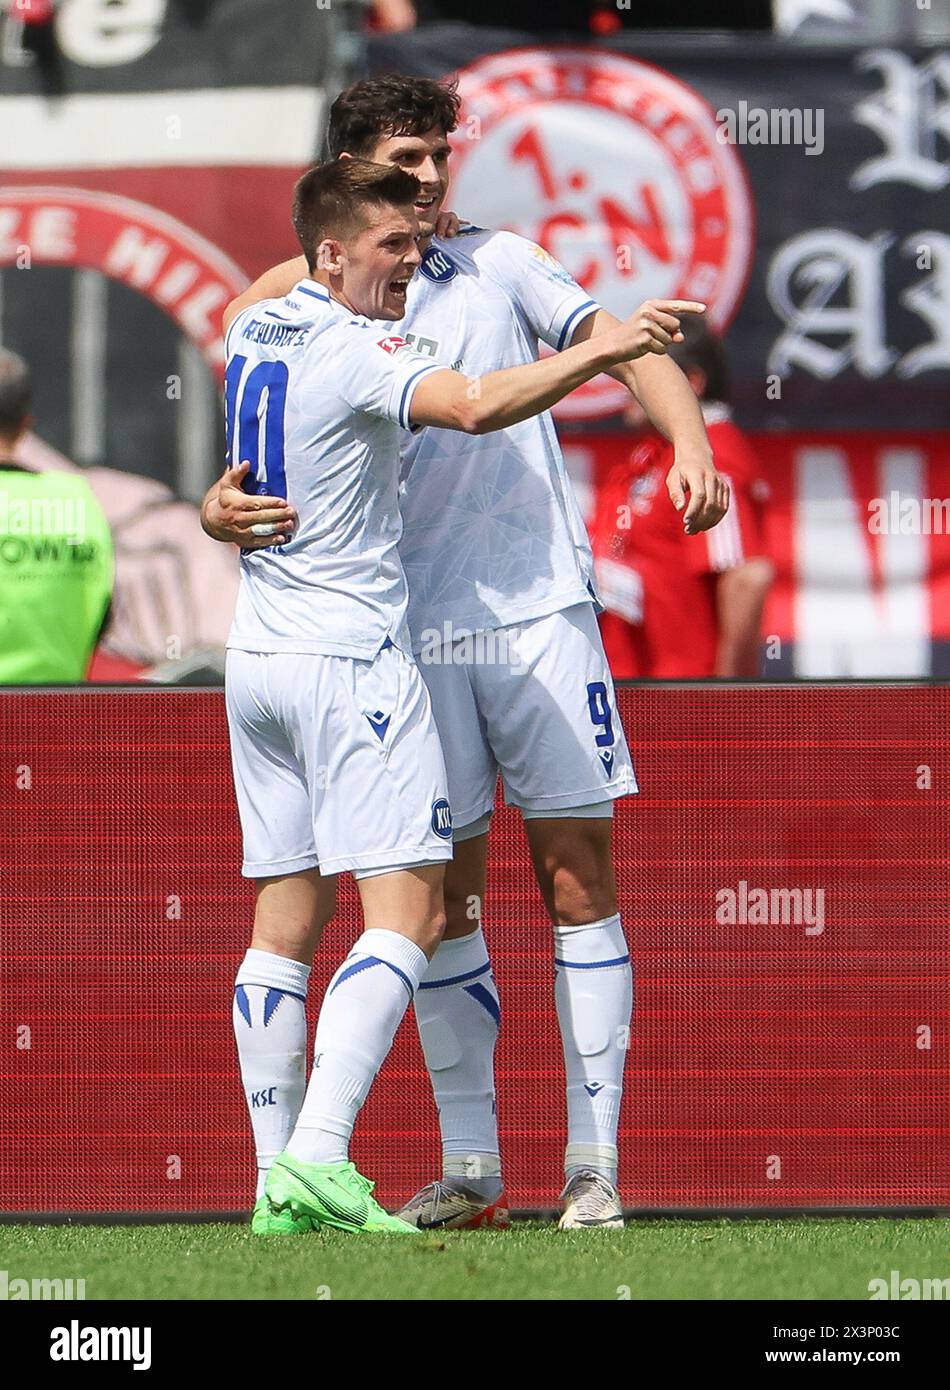 Nuremberg, Germany. 28th Apr, 2024. Soccer: Bundesliga 2, 1. FC Nürnberg - Karlsruher SC, Matchday 31, Max-Morlock-Stadion. Karlsruhe's Igor Matanovic (r) celebrates his 1:0 goal with teammate Marvin Wanitzek. Credit: Daniel Löb/dpa - IMPORTANT NOTE: In accordance with the regulations of the DFL German Football League and the DFB German Football Association, it is prohibited to utilize or have utilized photographs taken in the stadium and/or of the match in the form of sequential images and/or video-like photo series./dpa/Alamy Live News Stock Photo